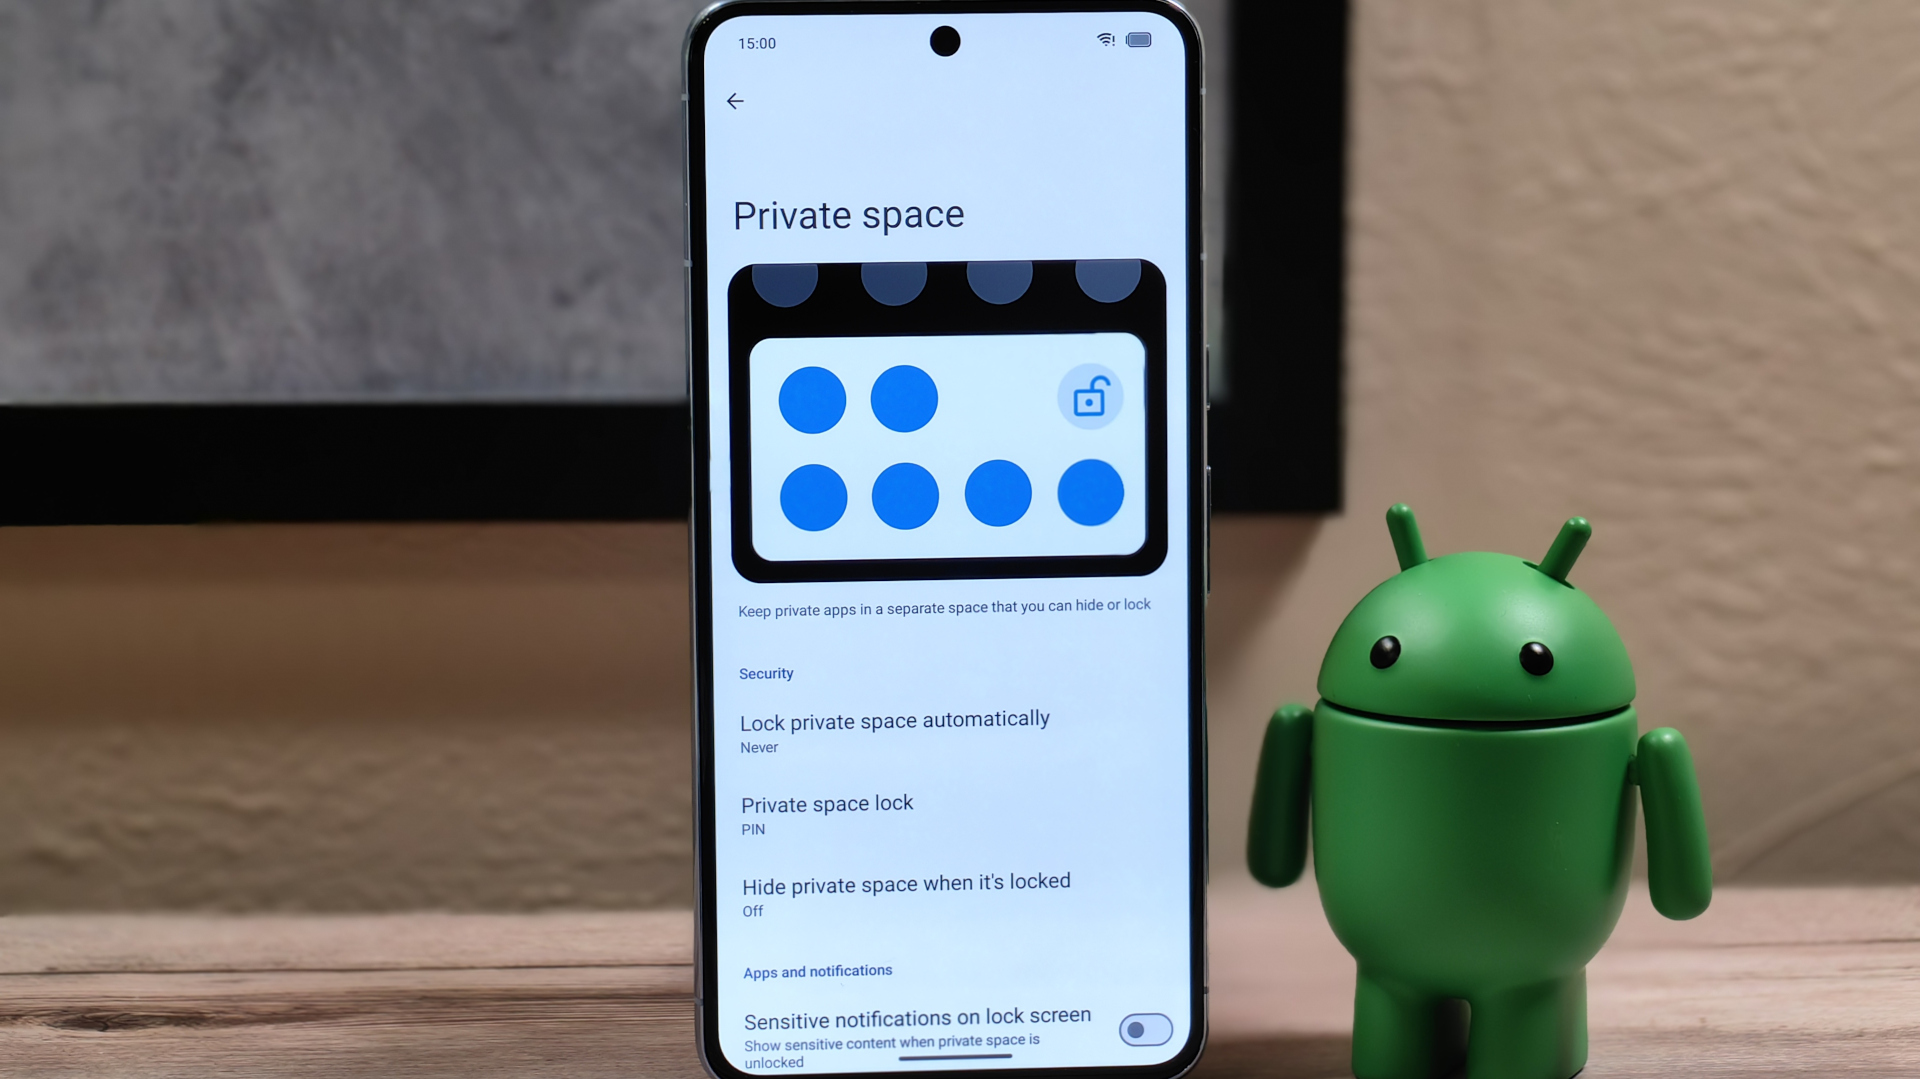 Android 15 private space settings page